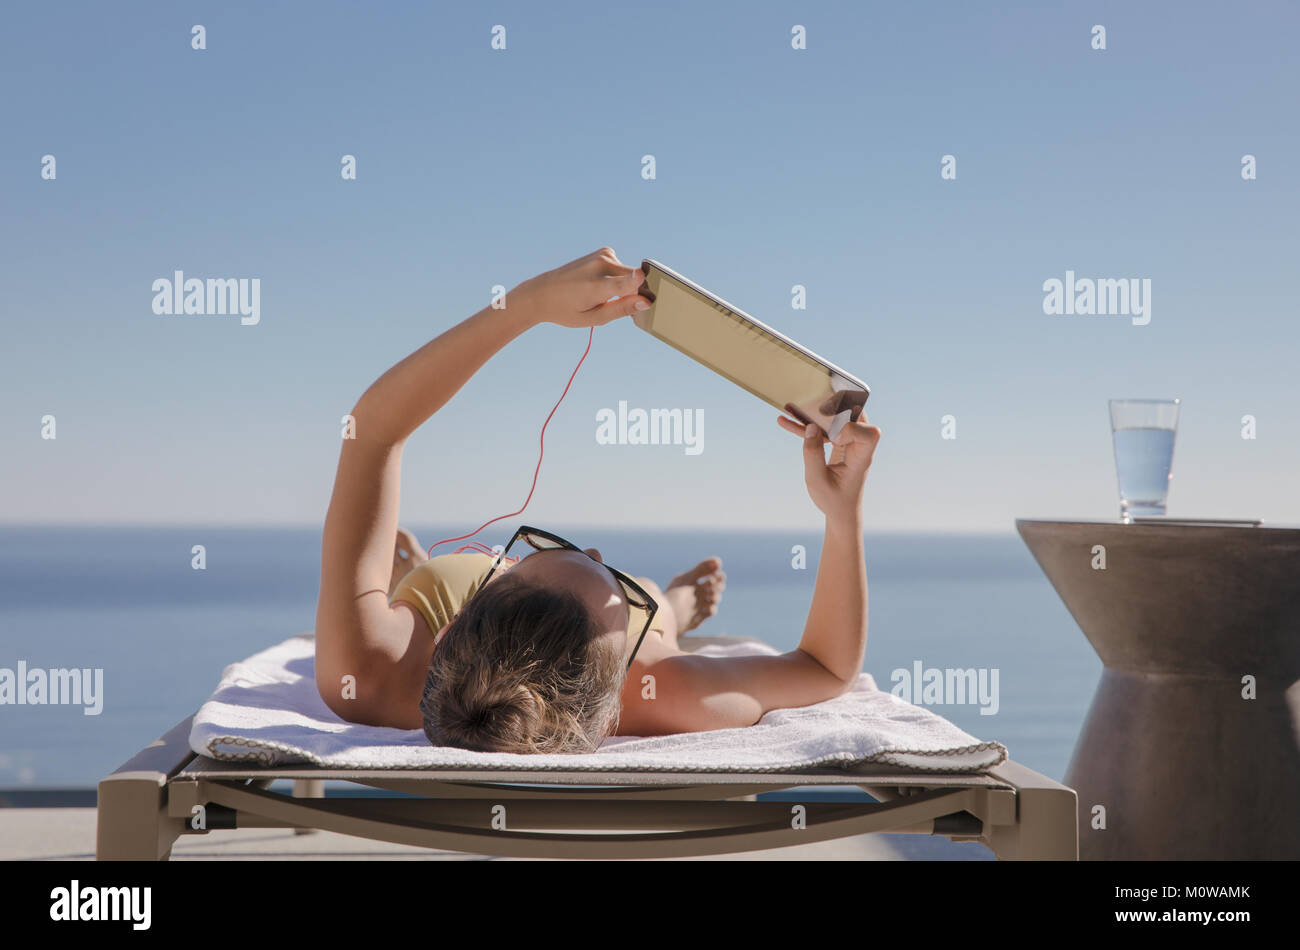 Woman sunbathing, using digital tablet on lounge chair on sunny patio with ocean view Stock Photo